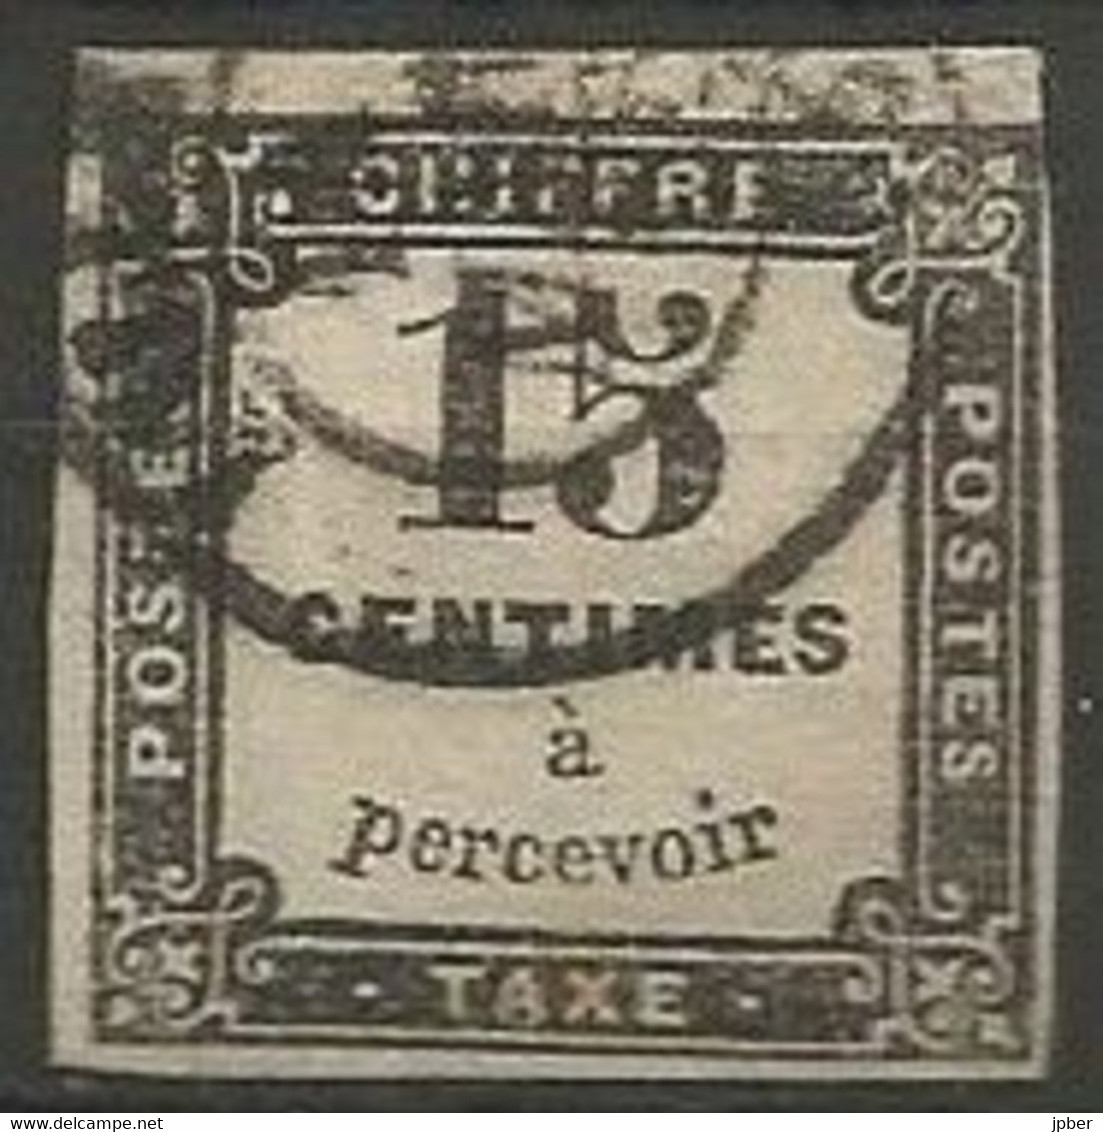 France - Timbres-Taxe - N° 3 Noir Typo - Obl. - 1859-1959 Afgestempeld